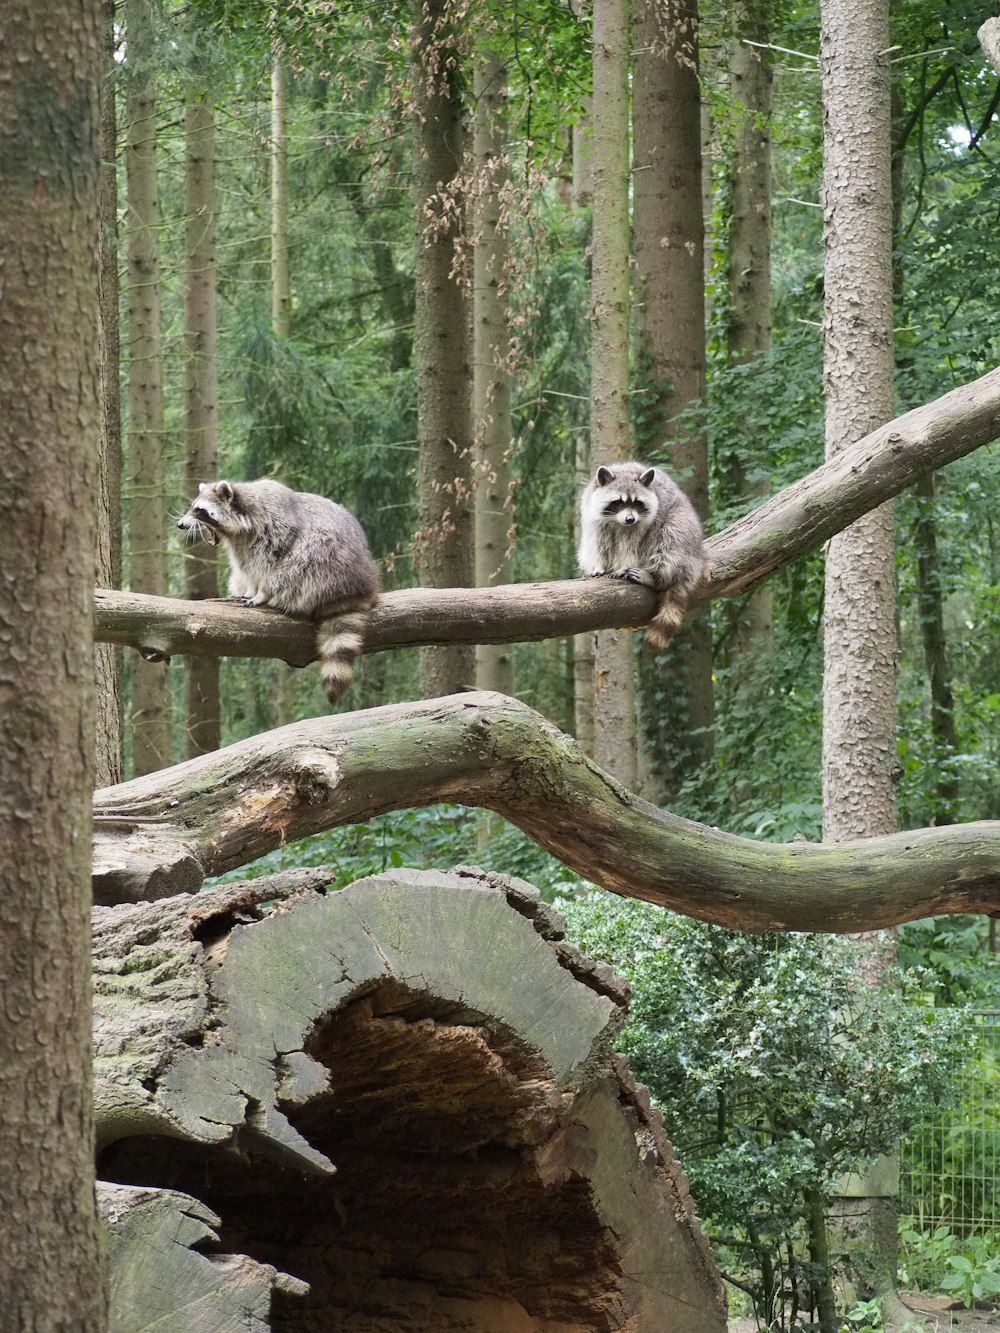 two raccoons sitting on a tree branch in a forest